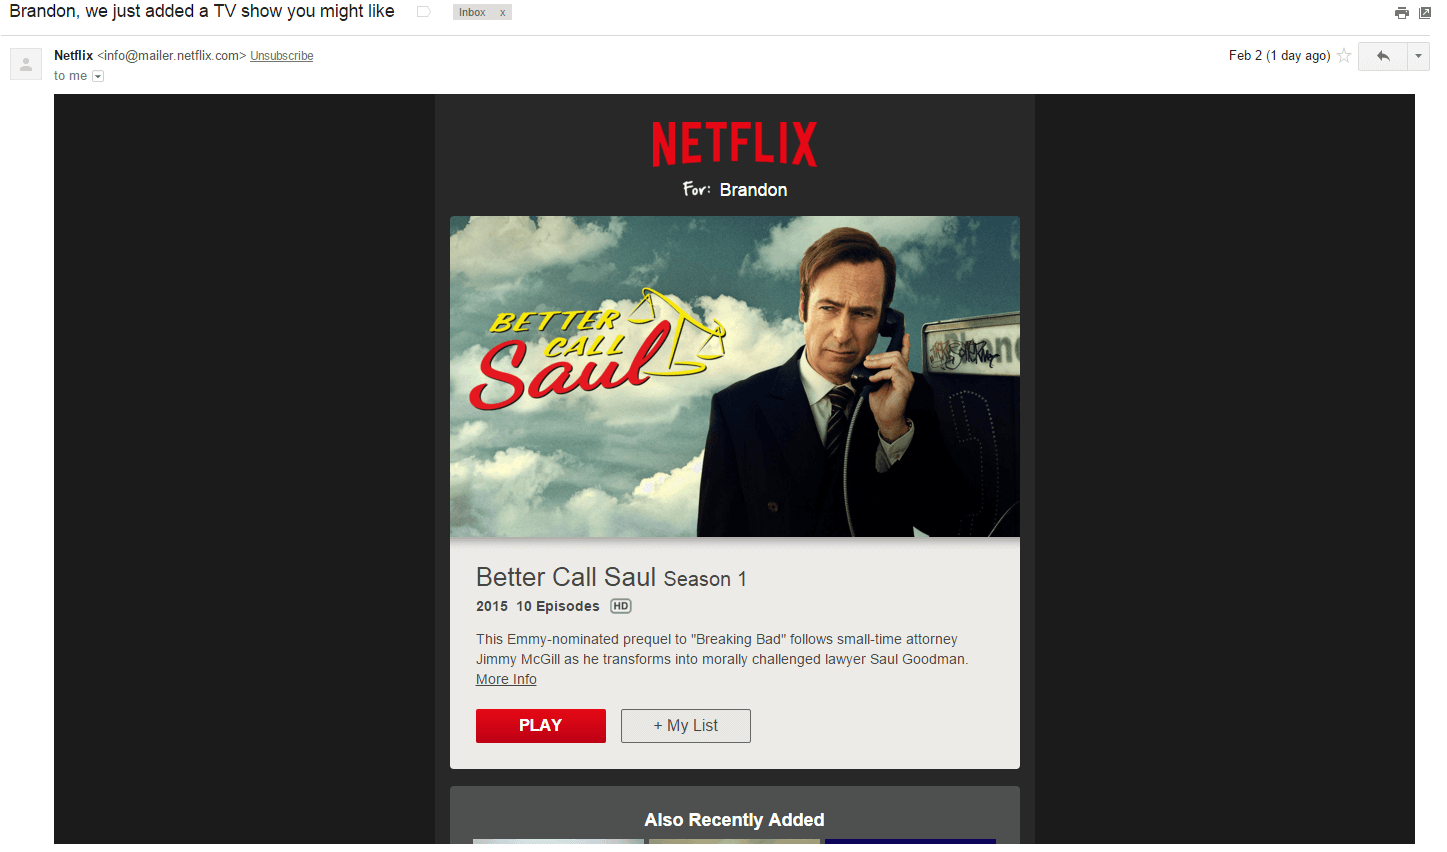 netflix email campaign 